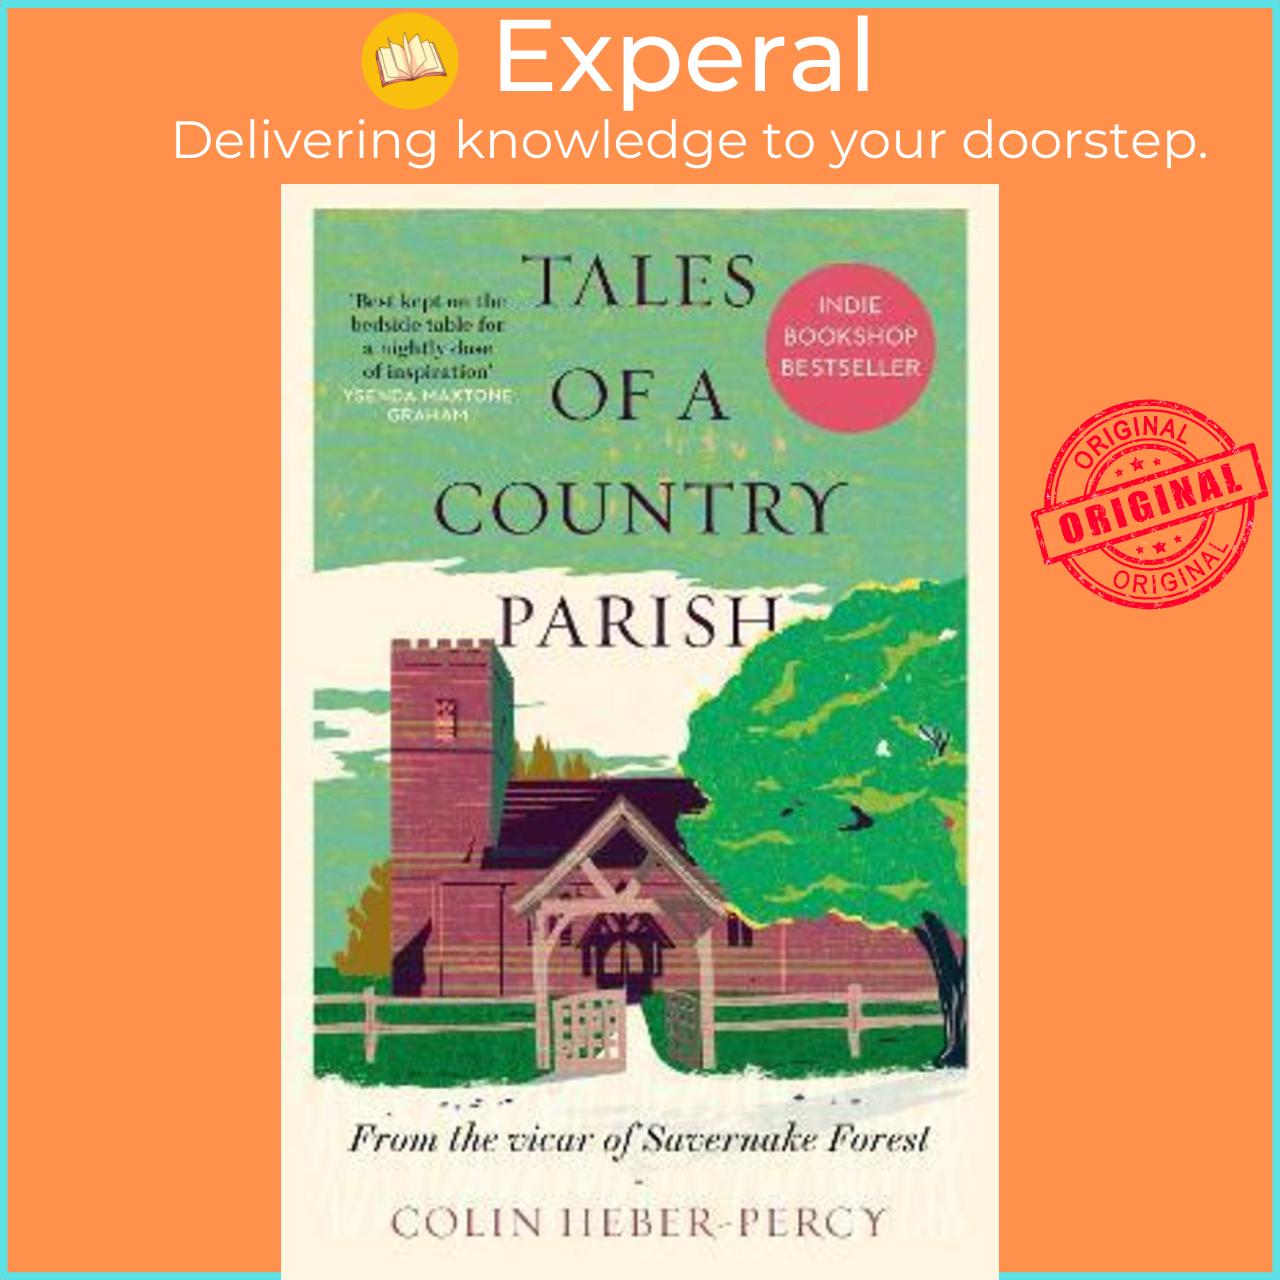 Sách - Tales of a Country Parish : From the vicar of Savernake Forest by Colin Heber-Percy (UK edition, paperback)